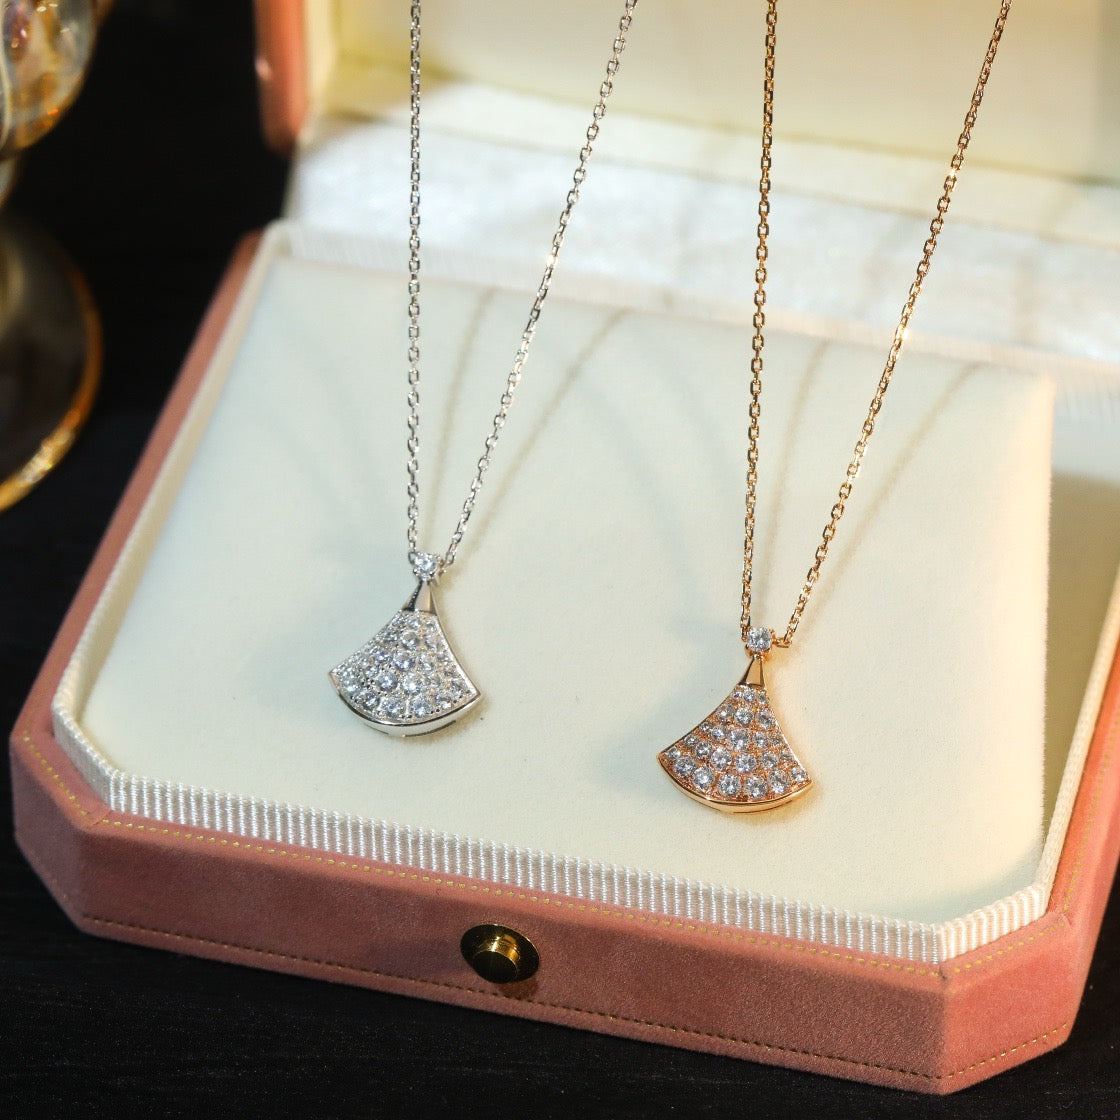 Sparkle Fan Pendant Necklace - Available in Silver and Rose Gold